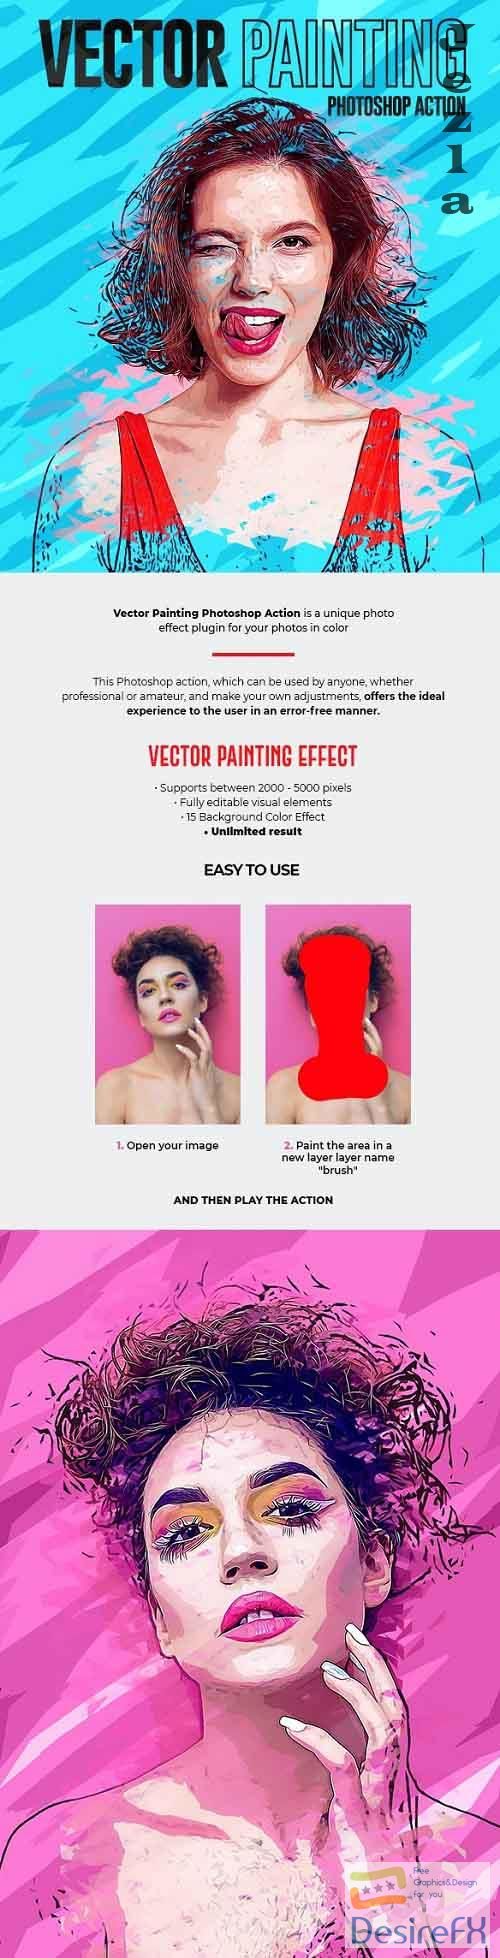 Vector Painting Effect Photoshop Action 26992554